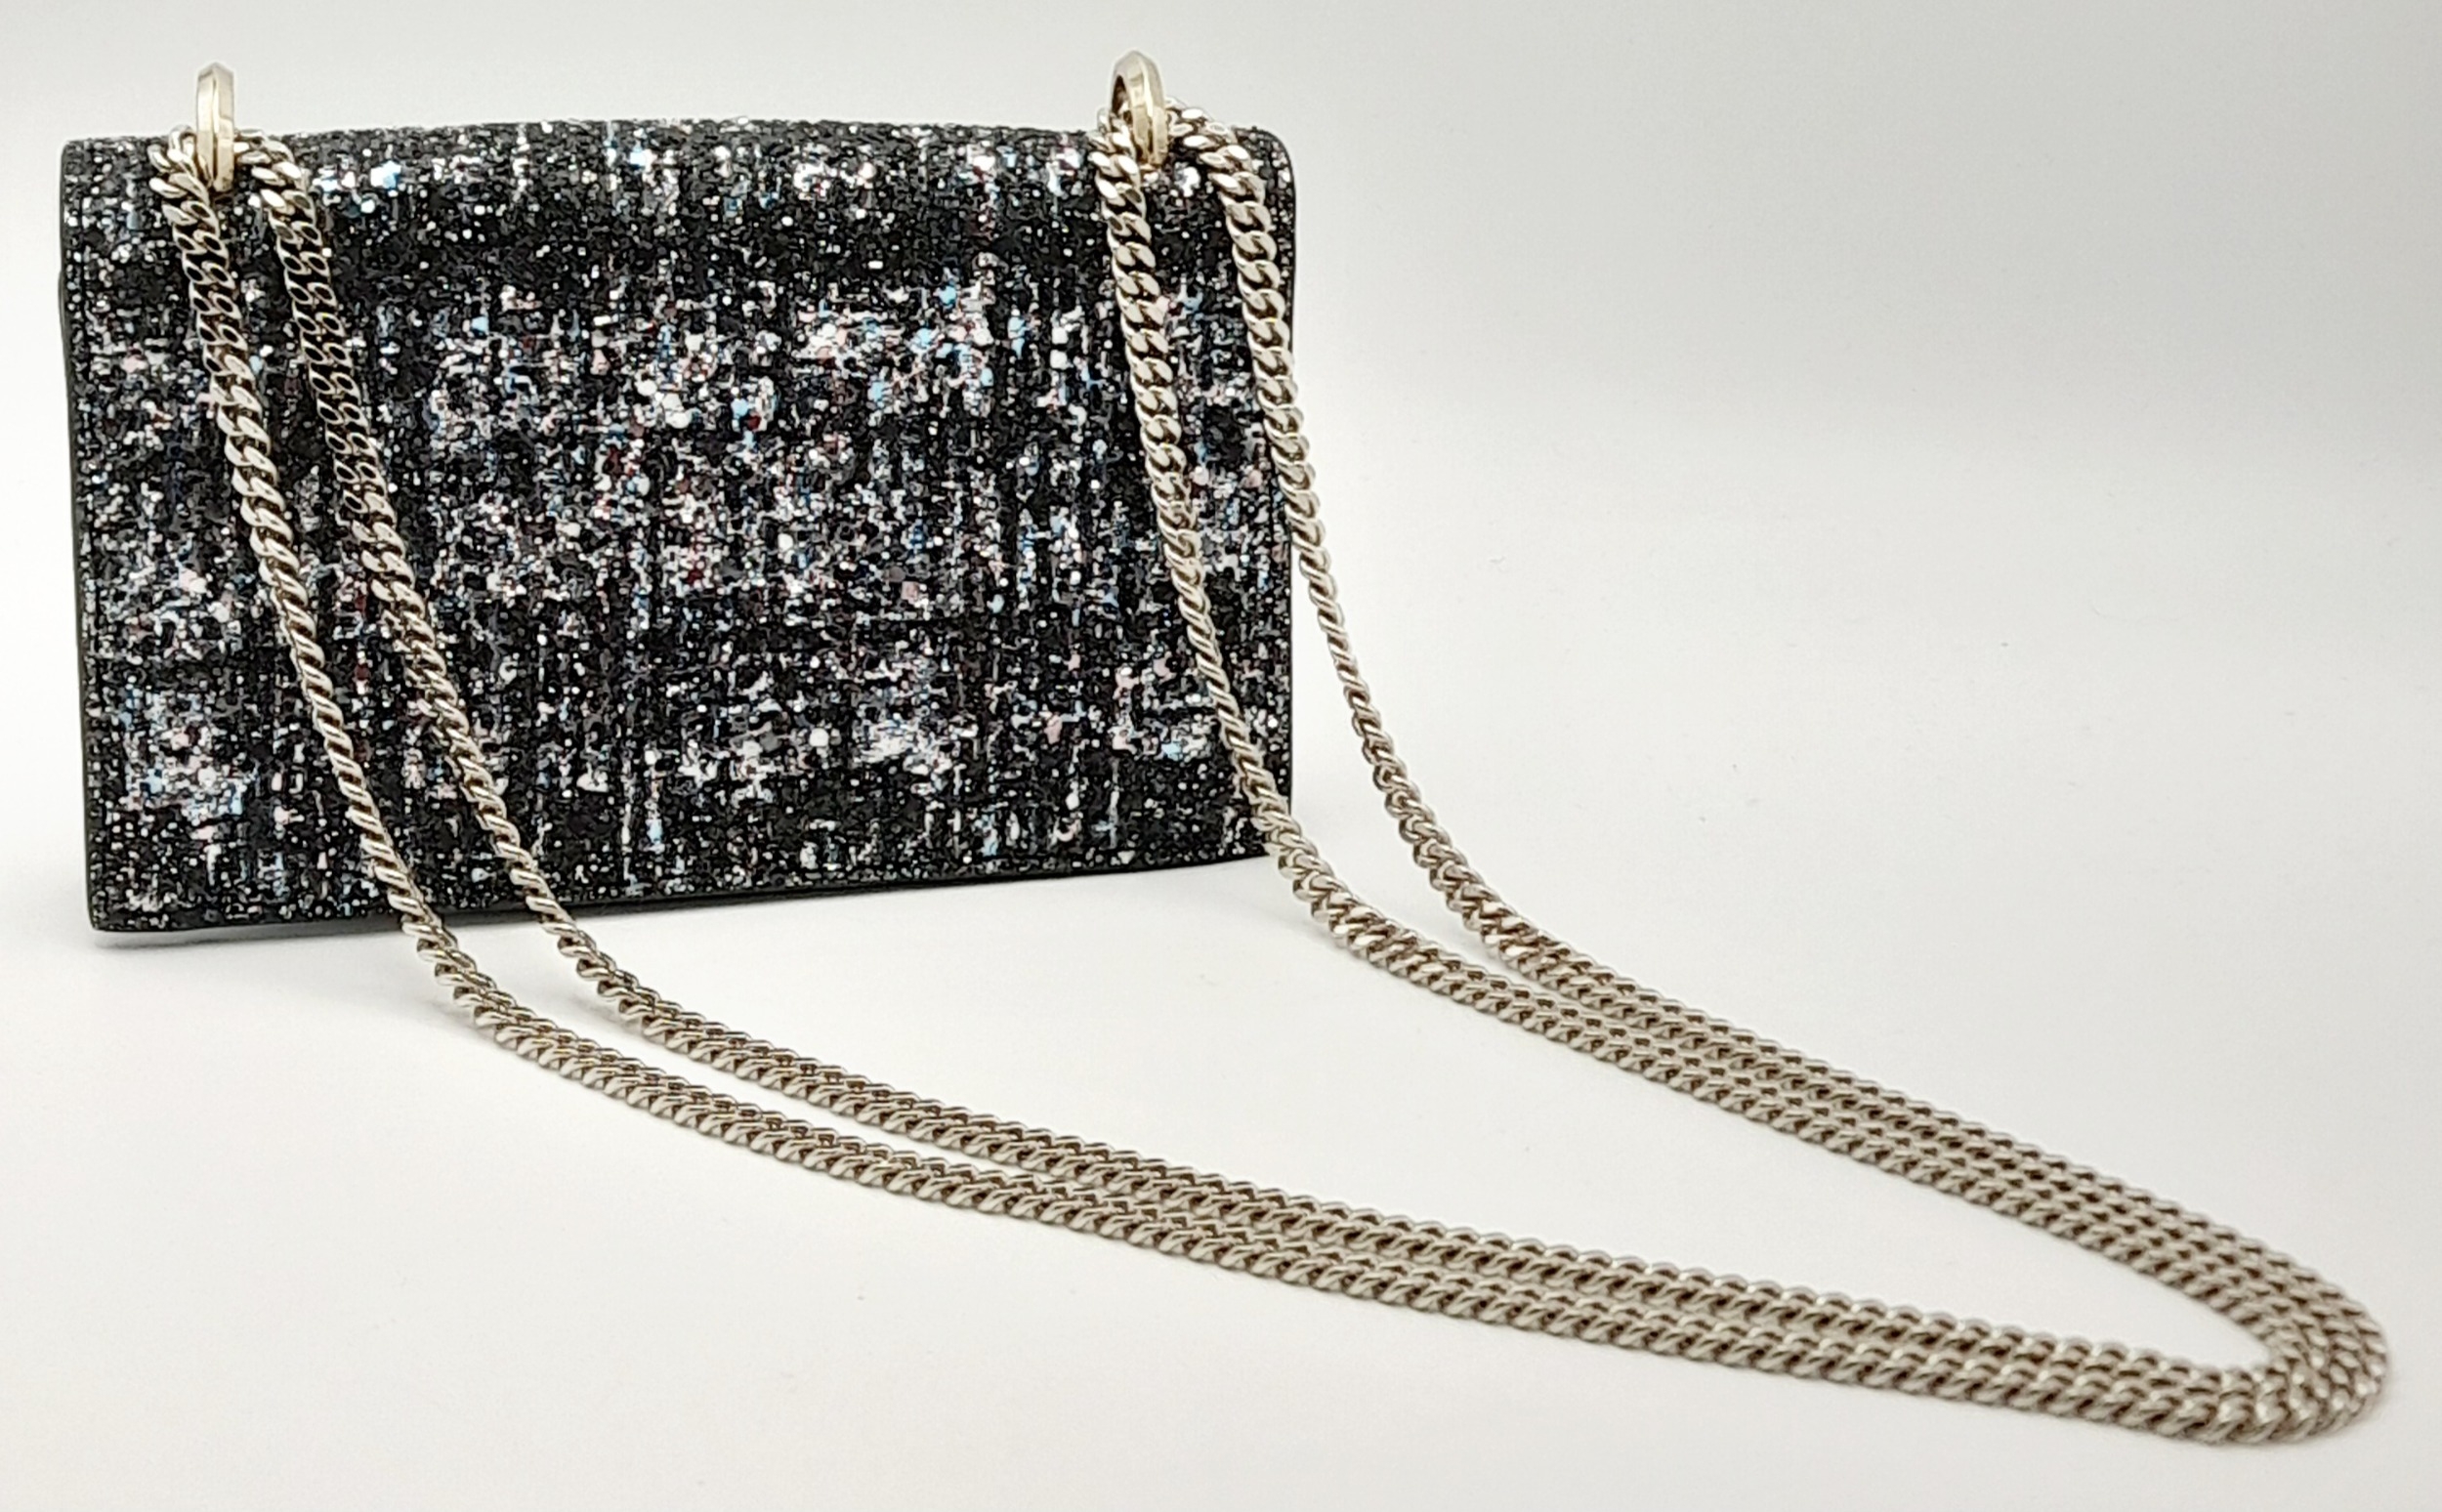 A Jimmy Choo 'Leni' Glitter Crossbody Bag. Black leather and blue, pink and black glitter exterior - Image 3 of 9